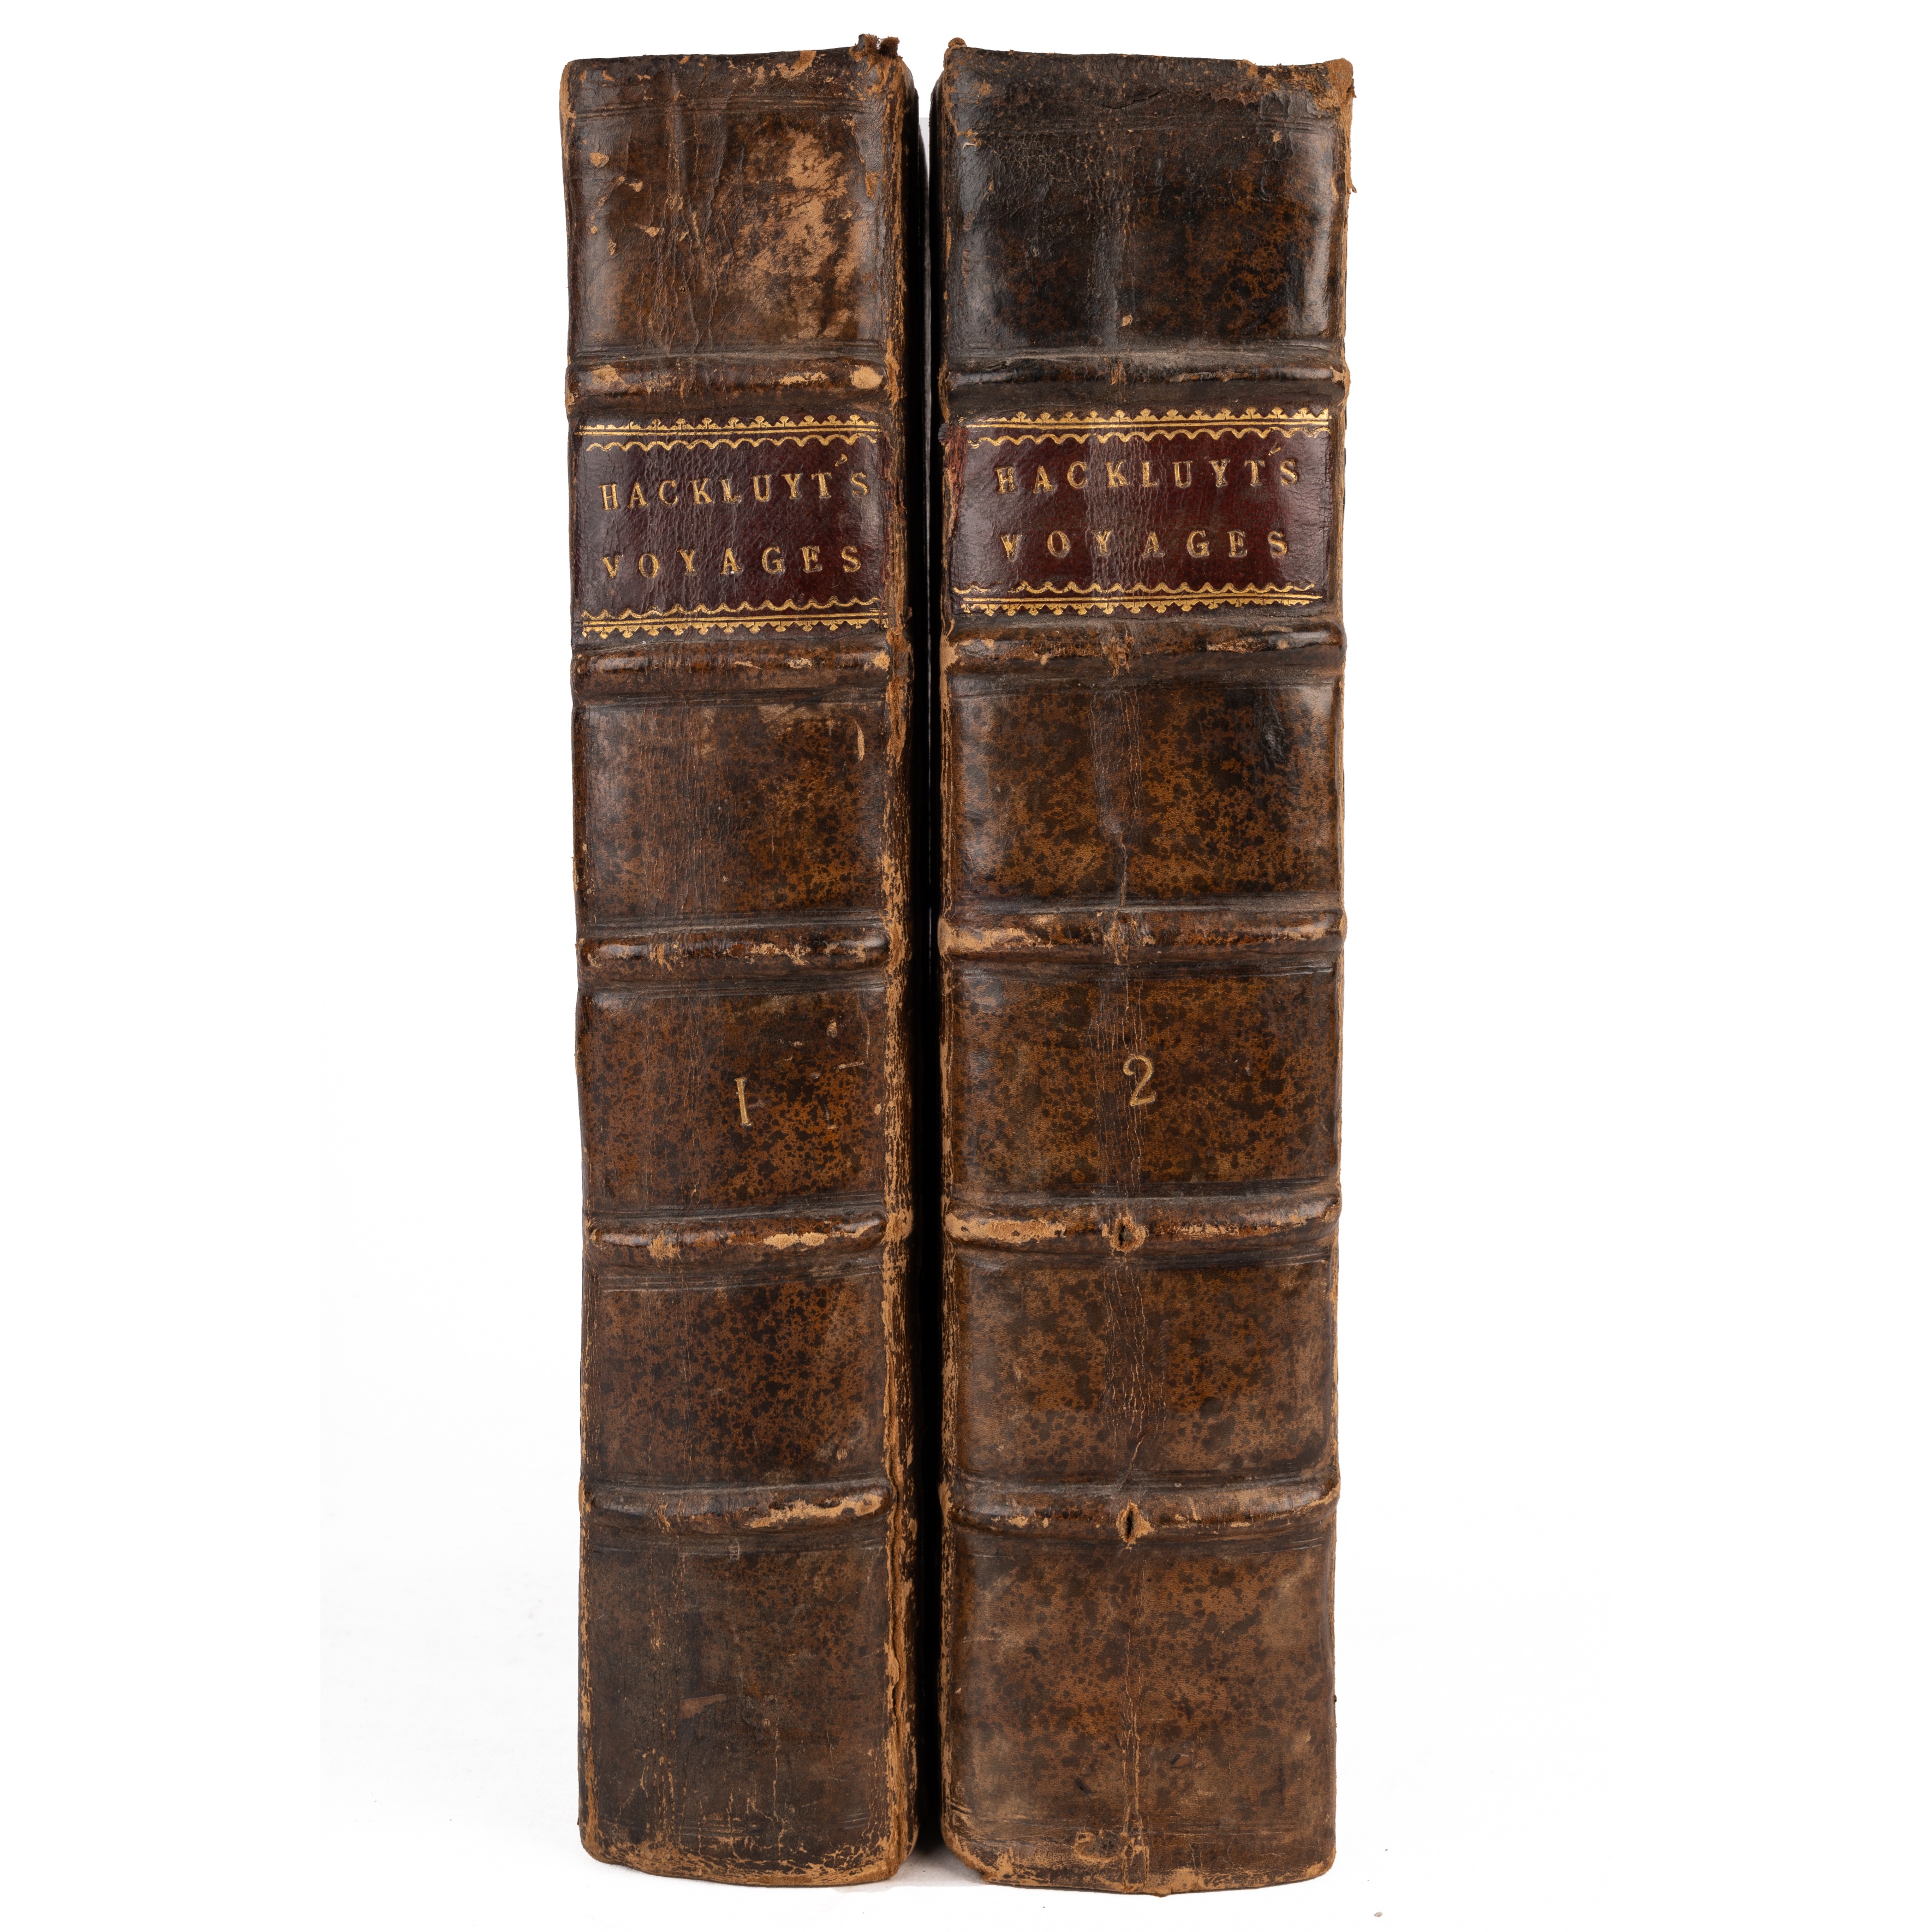 Hakluyt (Richard) (1552-1616. The Principal Navigations, Voyages, Traffiques and Discoveries of